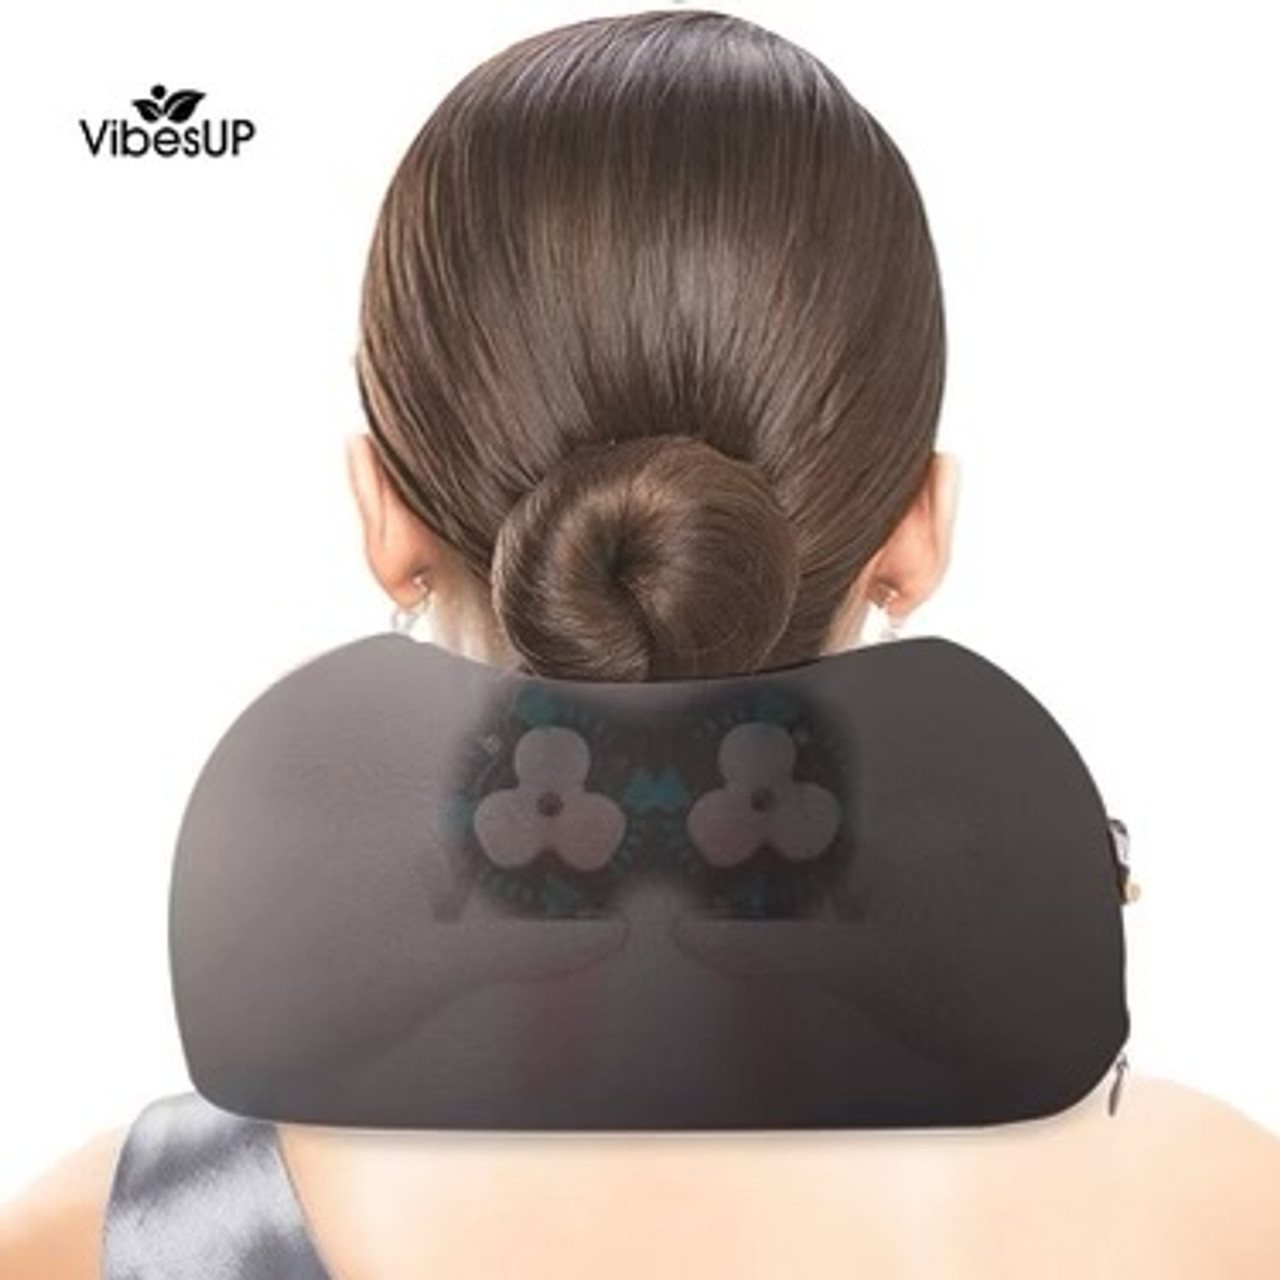 EXTREME NECK THERAPY- KNEADING NECK MASSAGER with VibesUP Crystal Vibes